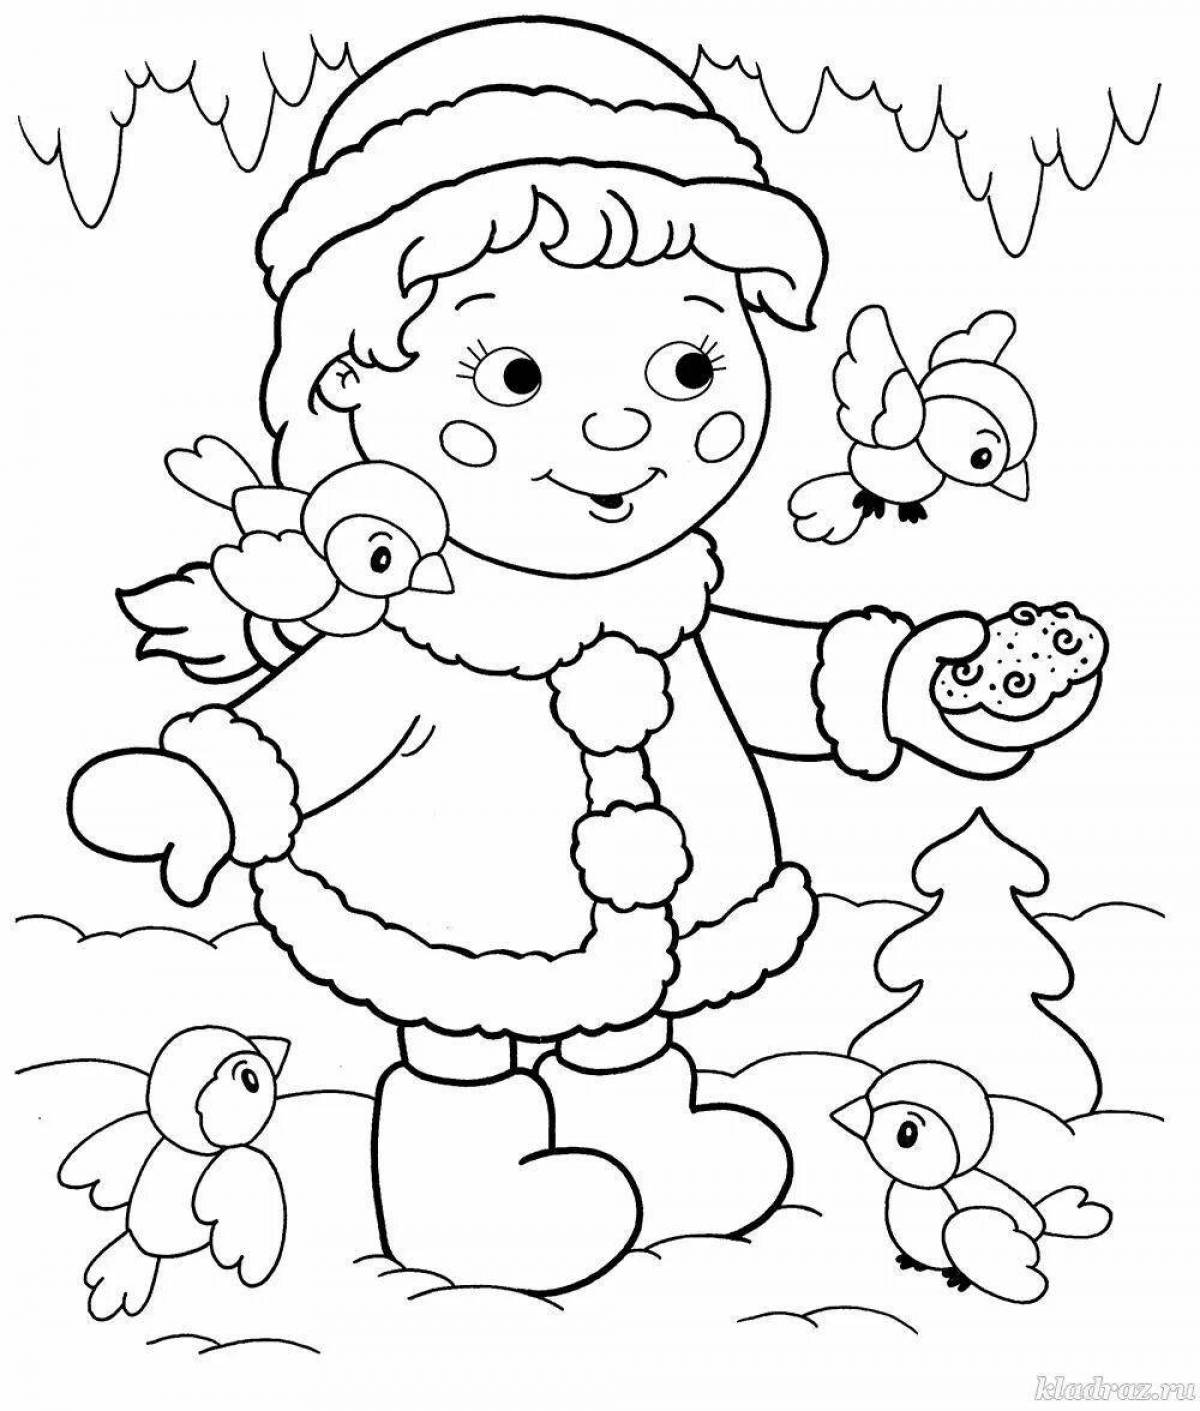 Snow Maiden playful coloring